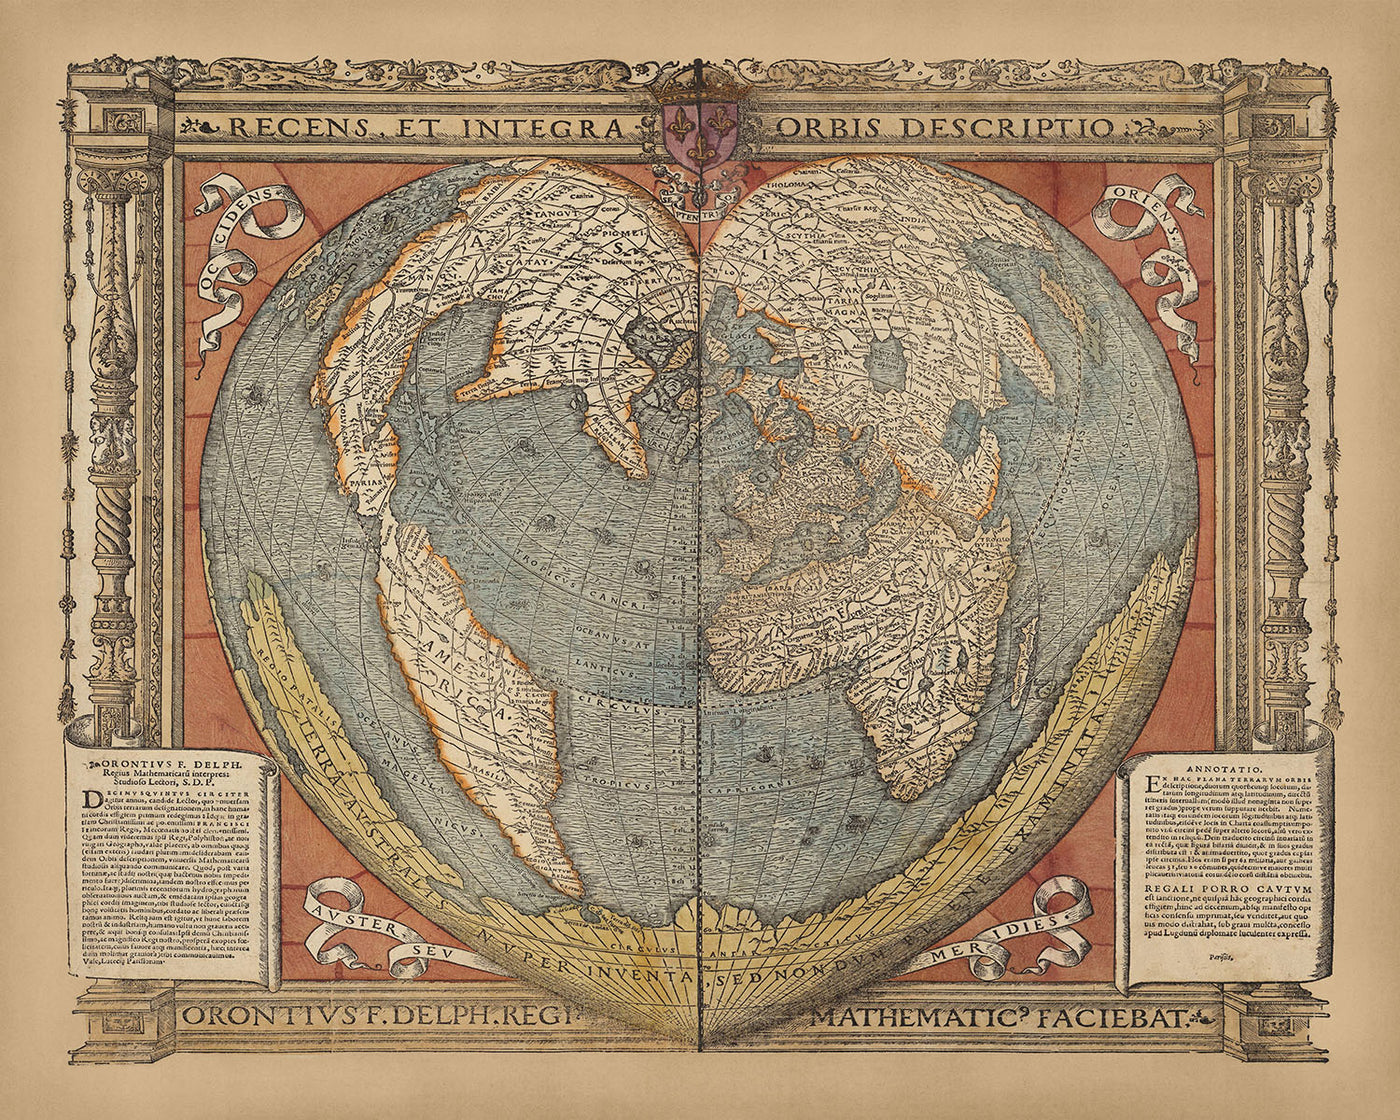 Old Heart-Shaped World Map by Fine, 1534: Cordiform Projection, Terra Australis, Latin Annotations